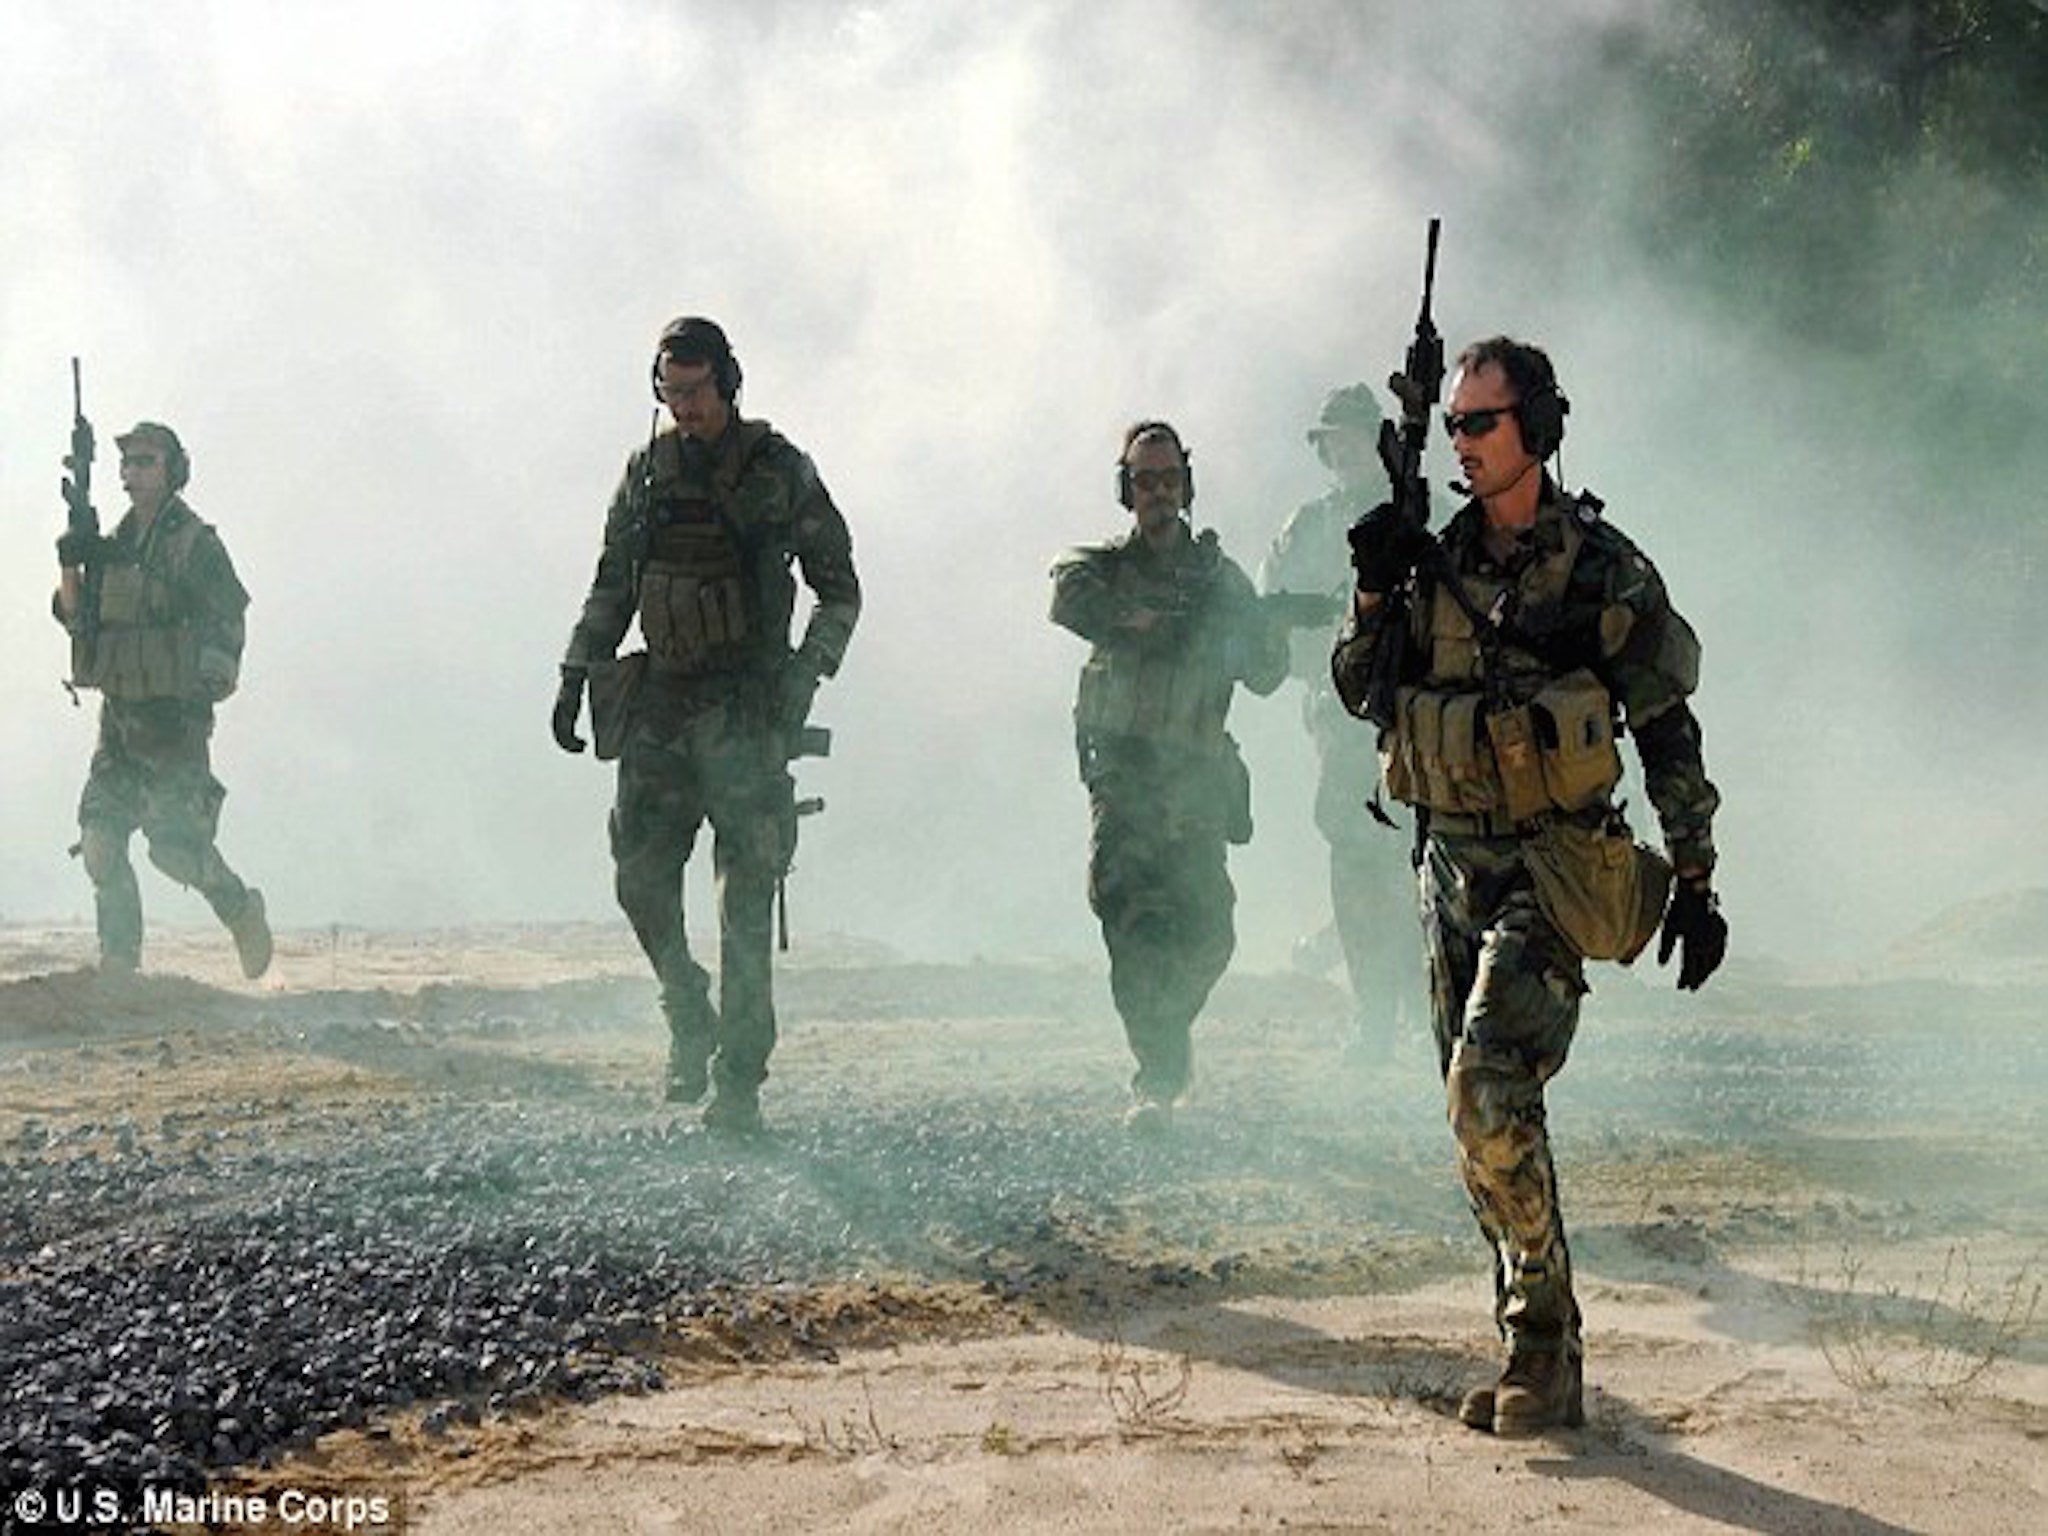 Navy SEAL operators during a training exercise in the US